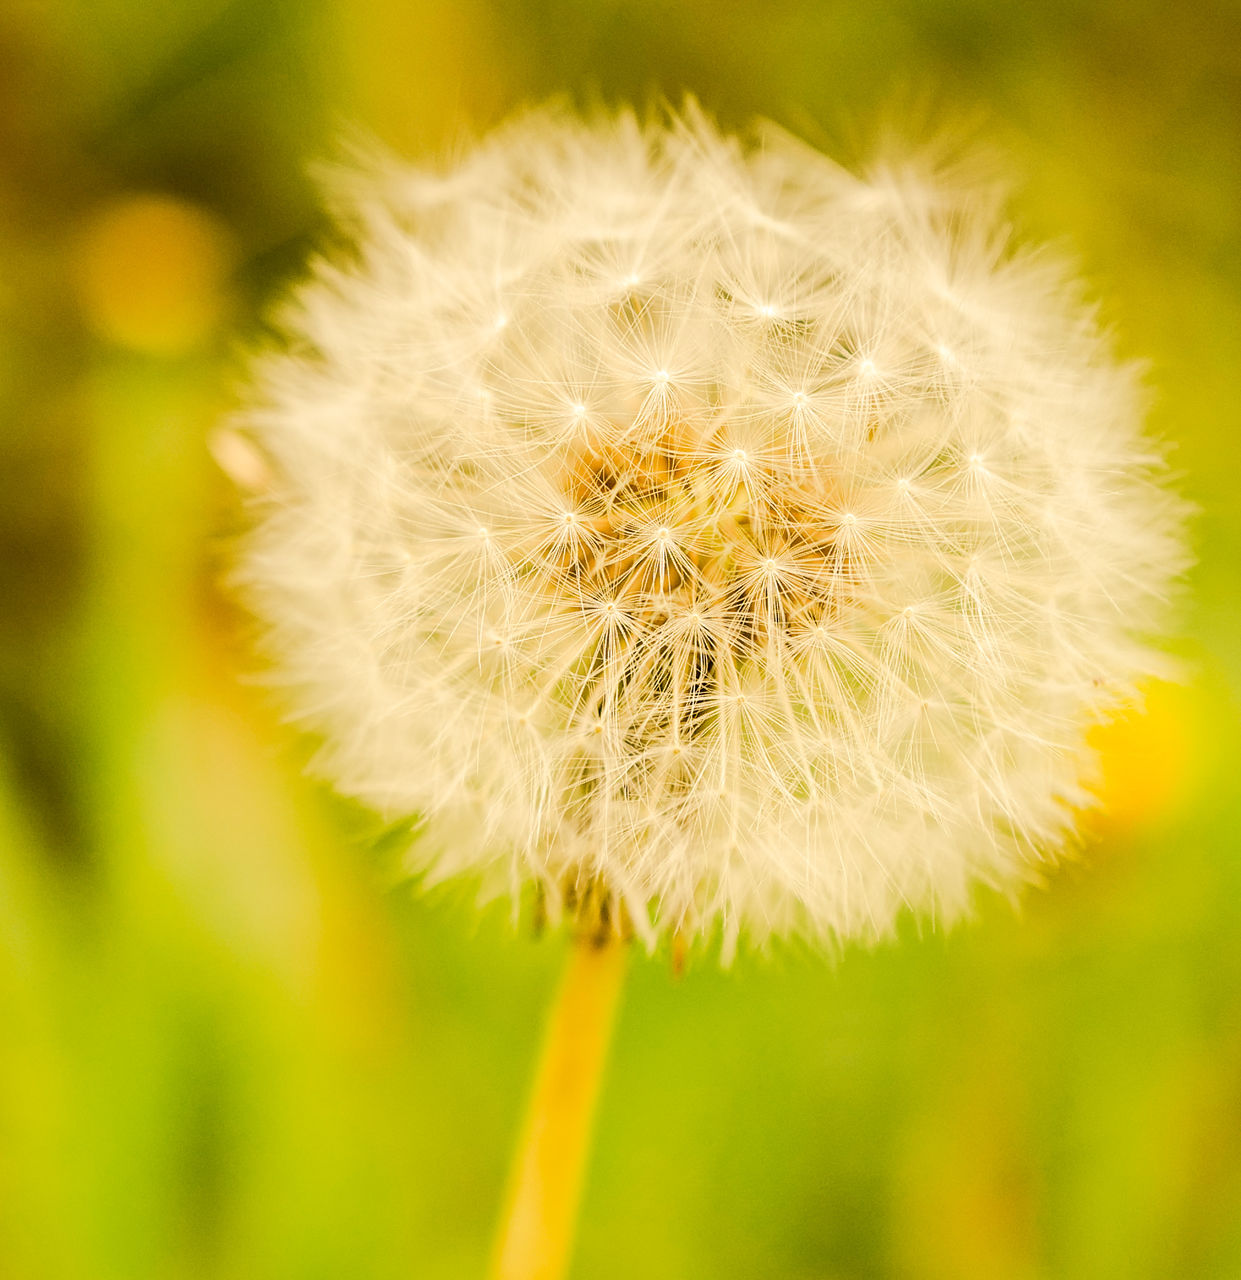 flower, plant, dandelion, flowering plant, freshness, fragility, beauty in nature, close-up, nature, yellow, macro photography, focus on foreground, flower head, no people, inflorescence, growth, plant stem, seed, softness, grass, green, white, field, wildflower, dandelion seed, springtime, outdoors, positive emotion, day, petal, meadow, blossom, selective focus, environment